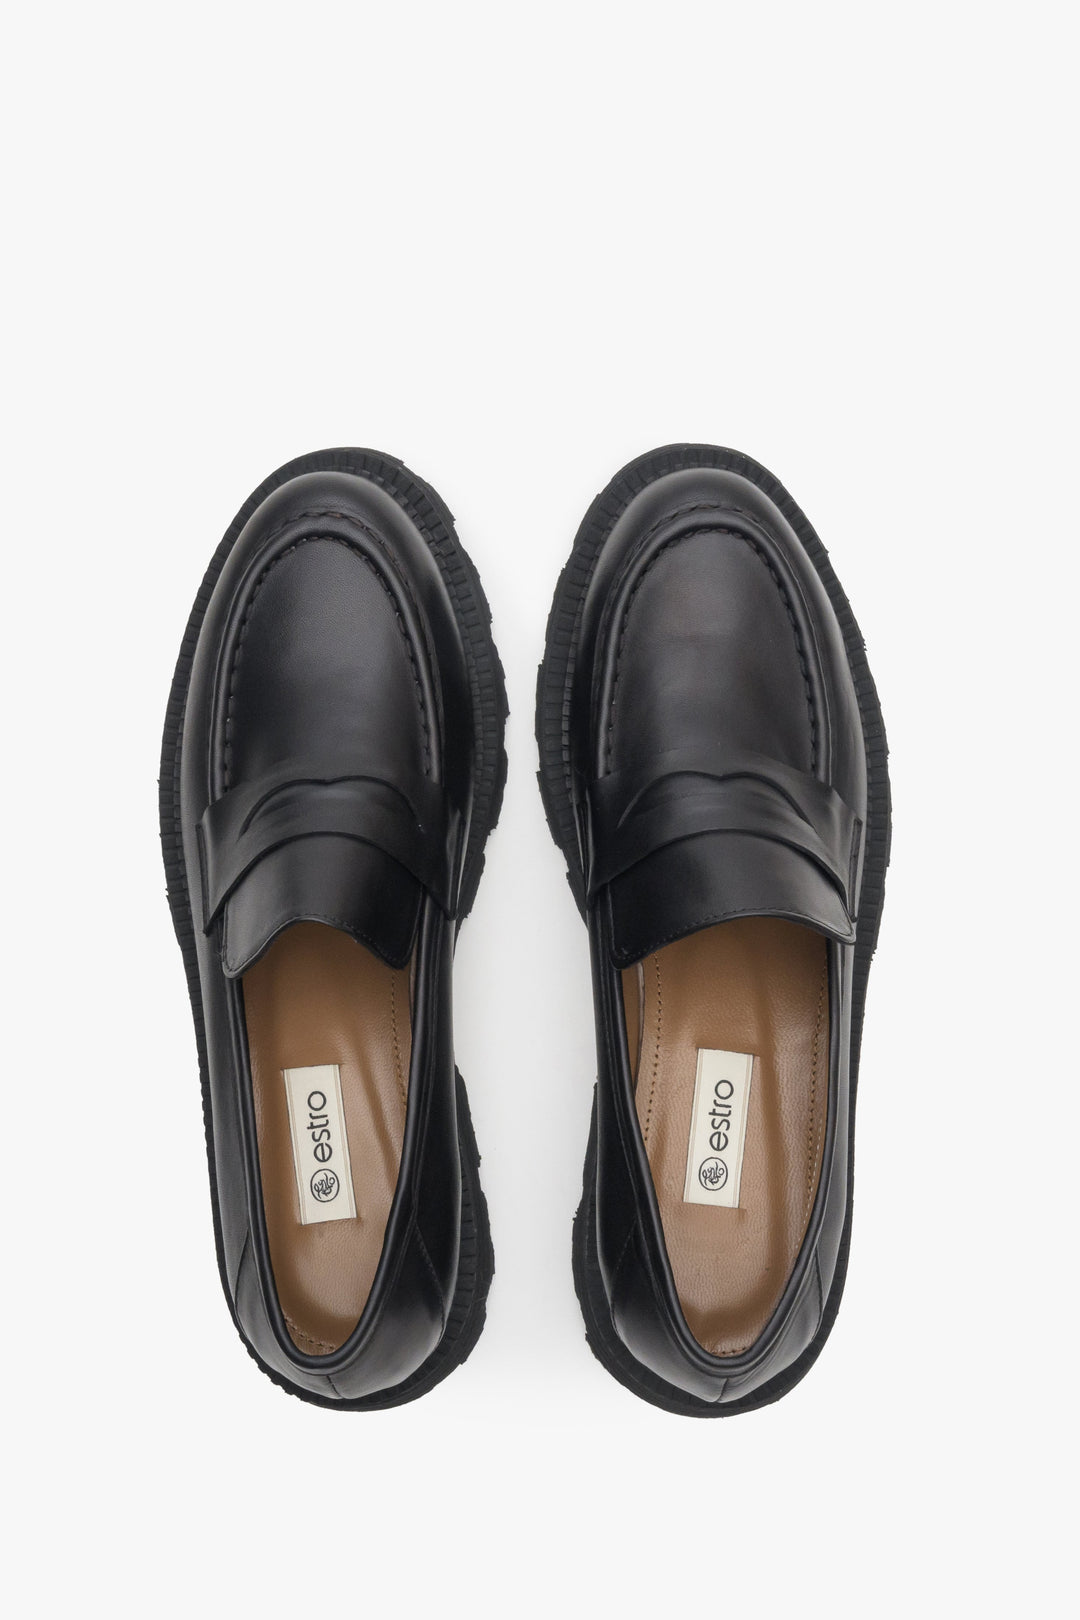 Women's black leather loafers by Estro - top view presentation of the model.